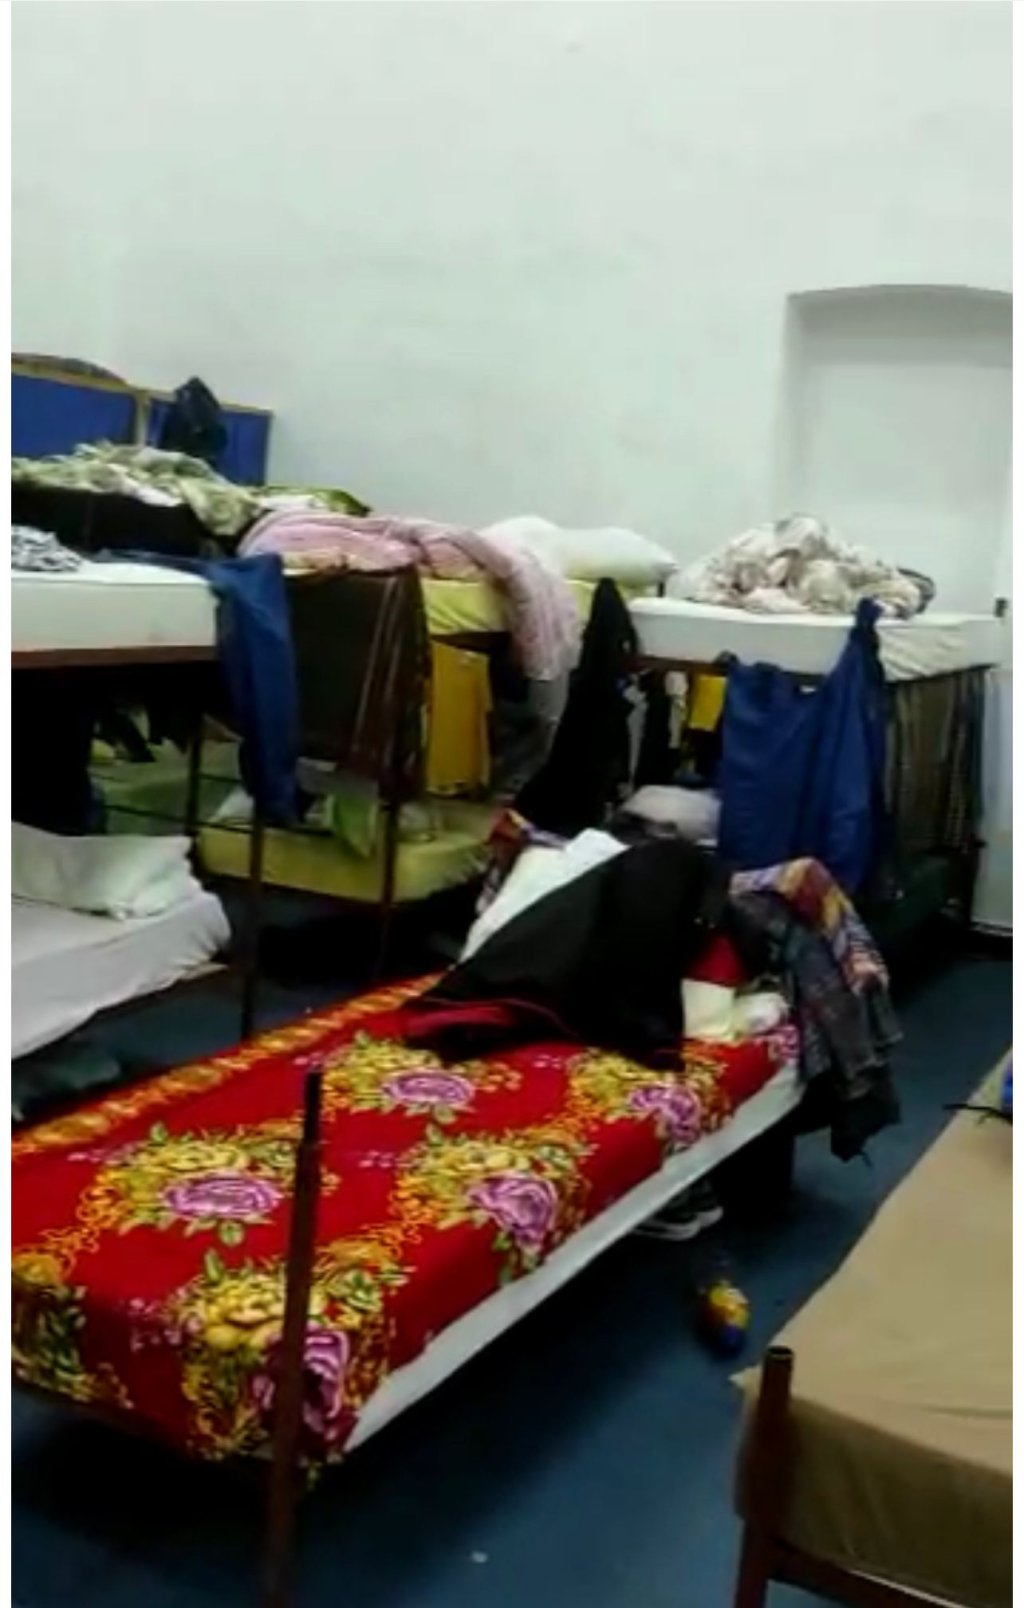 Screenshot from a video showing the living Conditions of some of the Bangladeshi Migrants in Romania | Photo InfoMigrants.